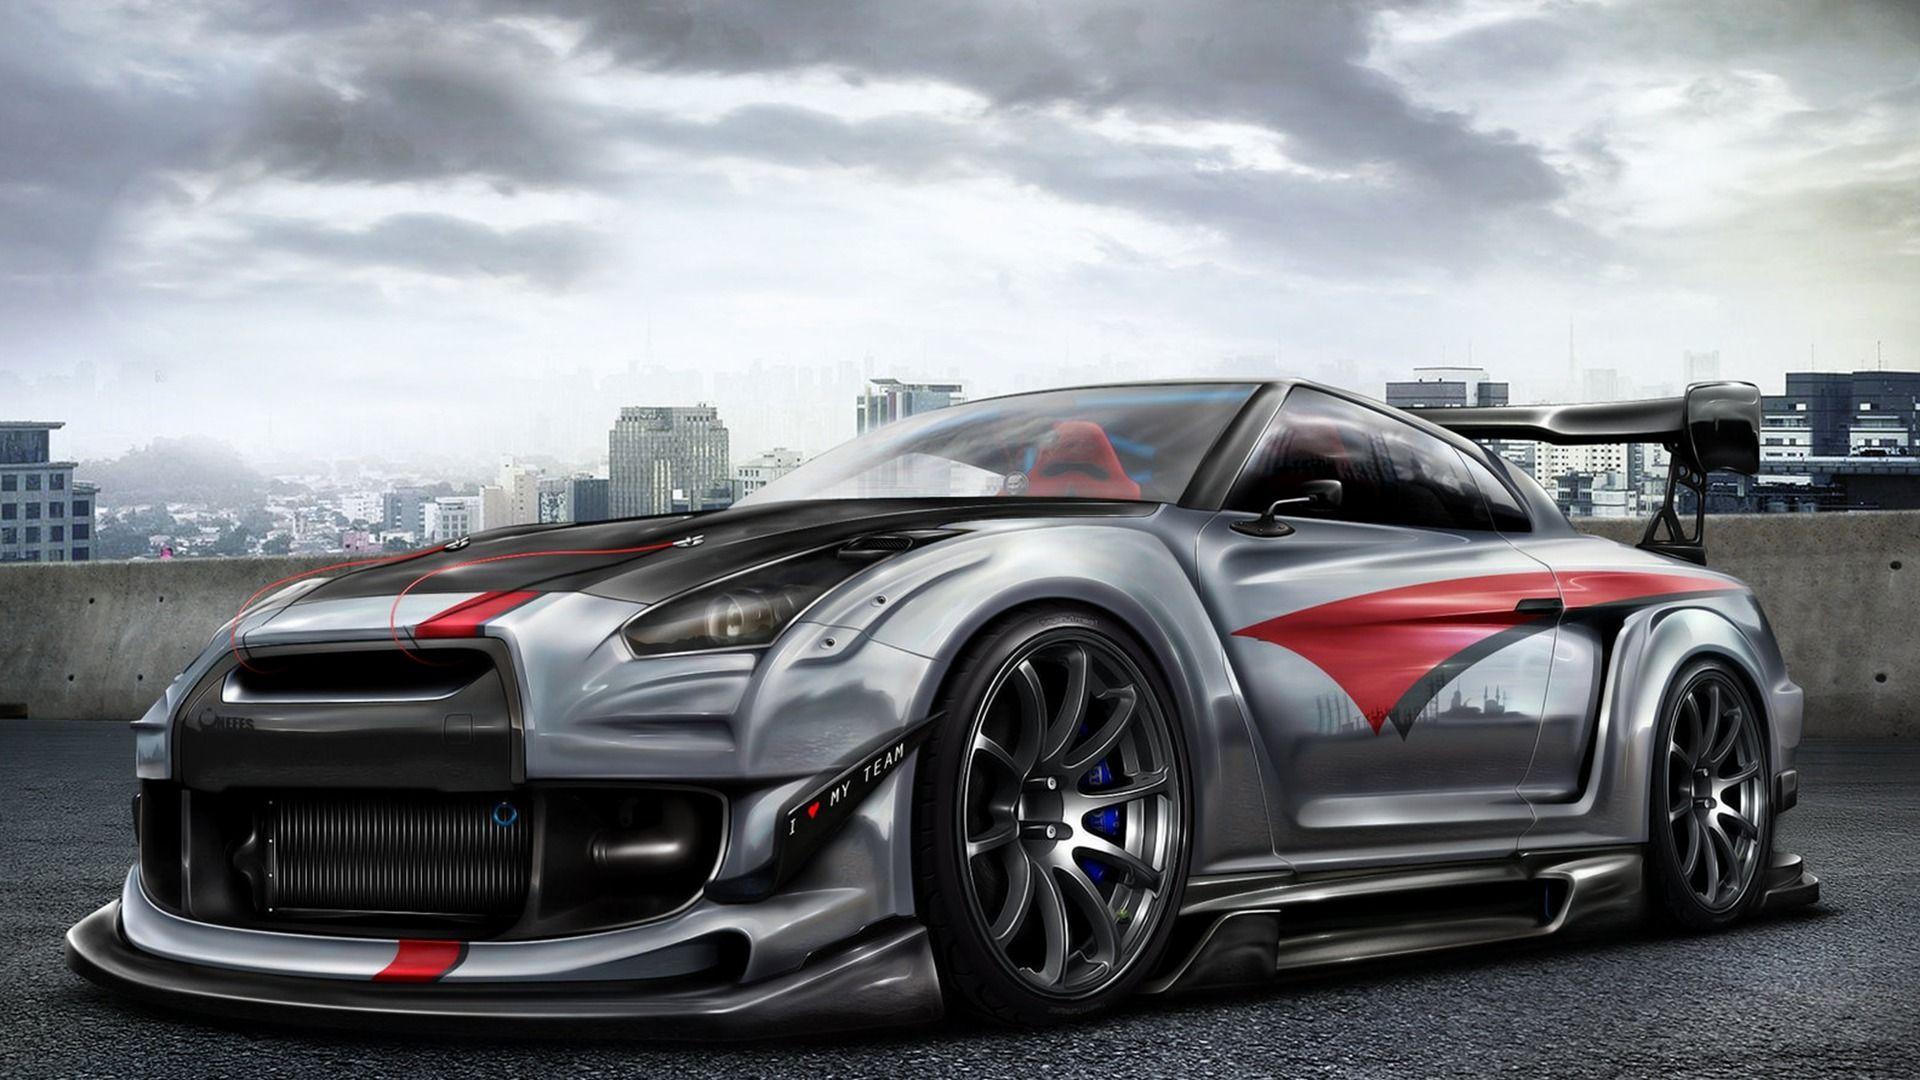 You searched for Nissan Skyline R35 auto gallerycar auto gallery